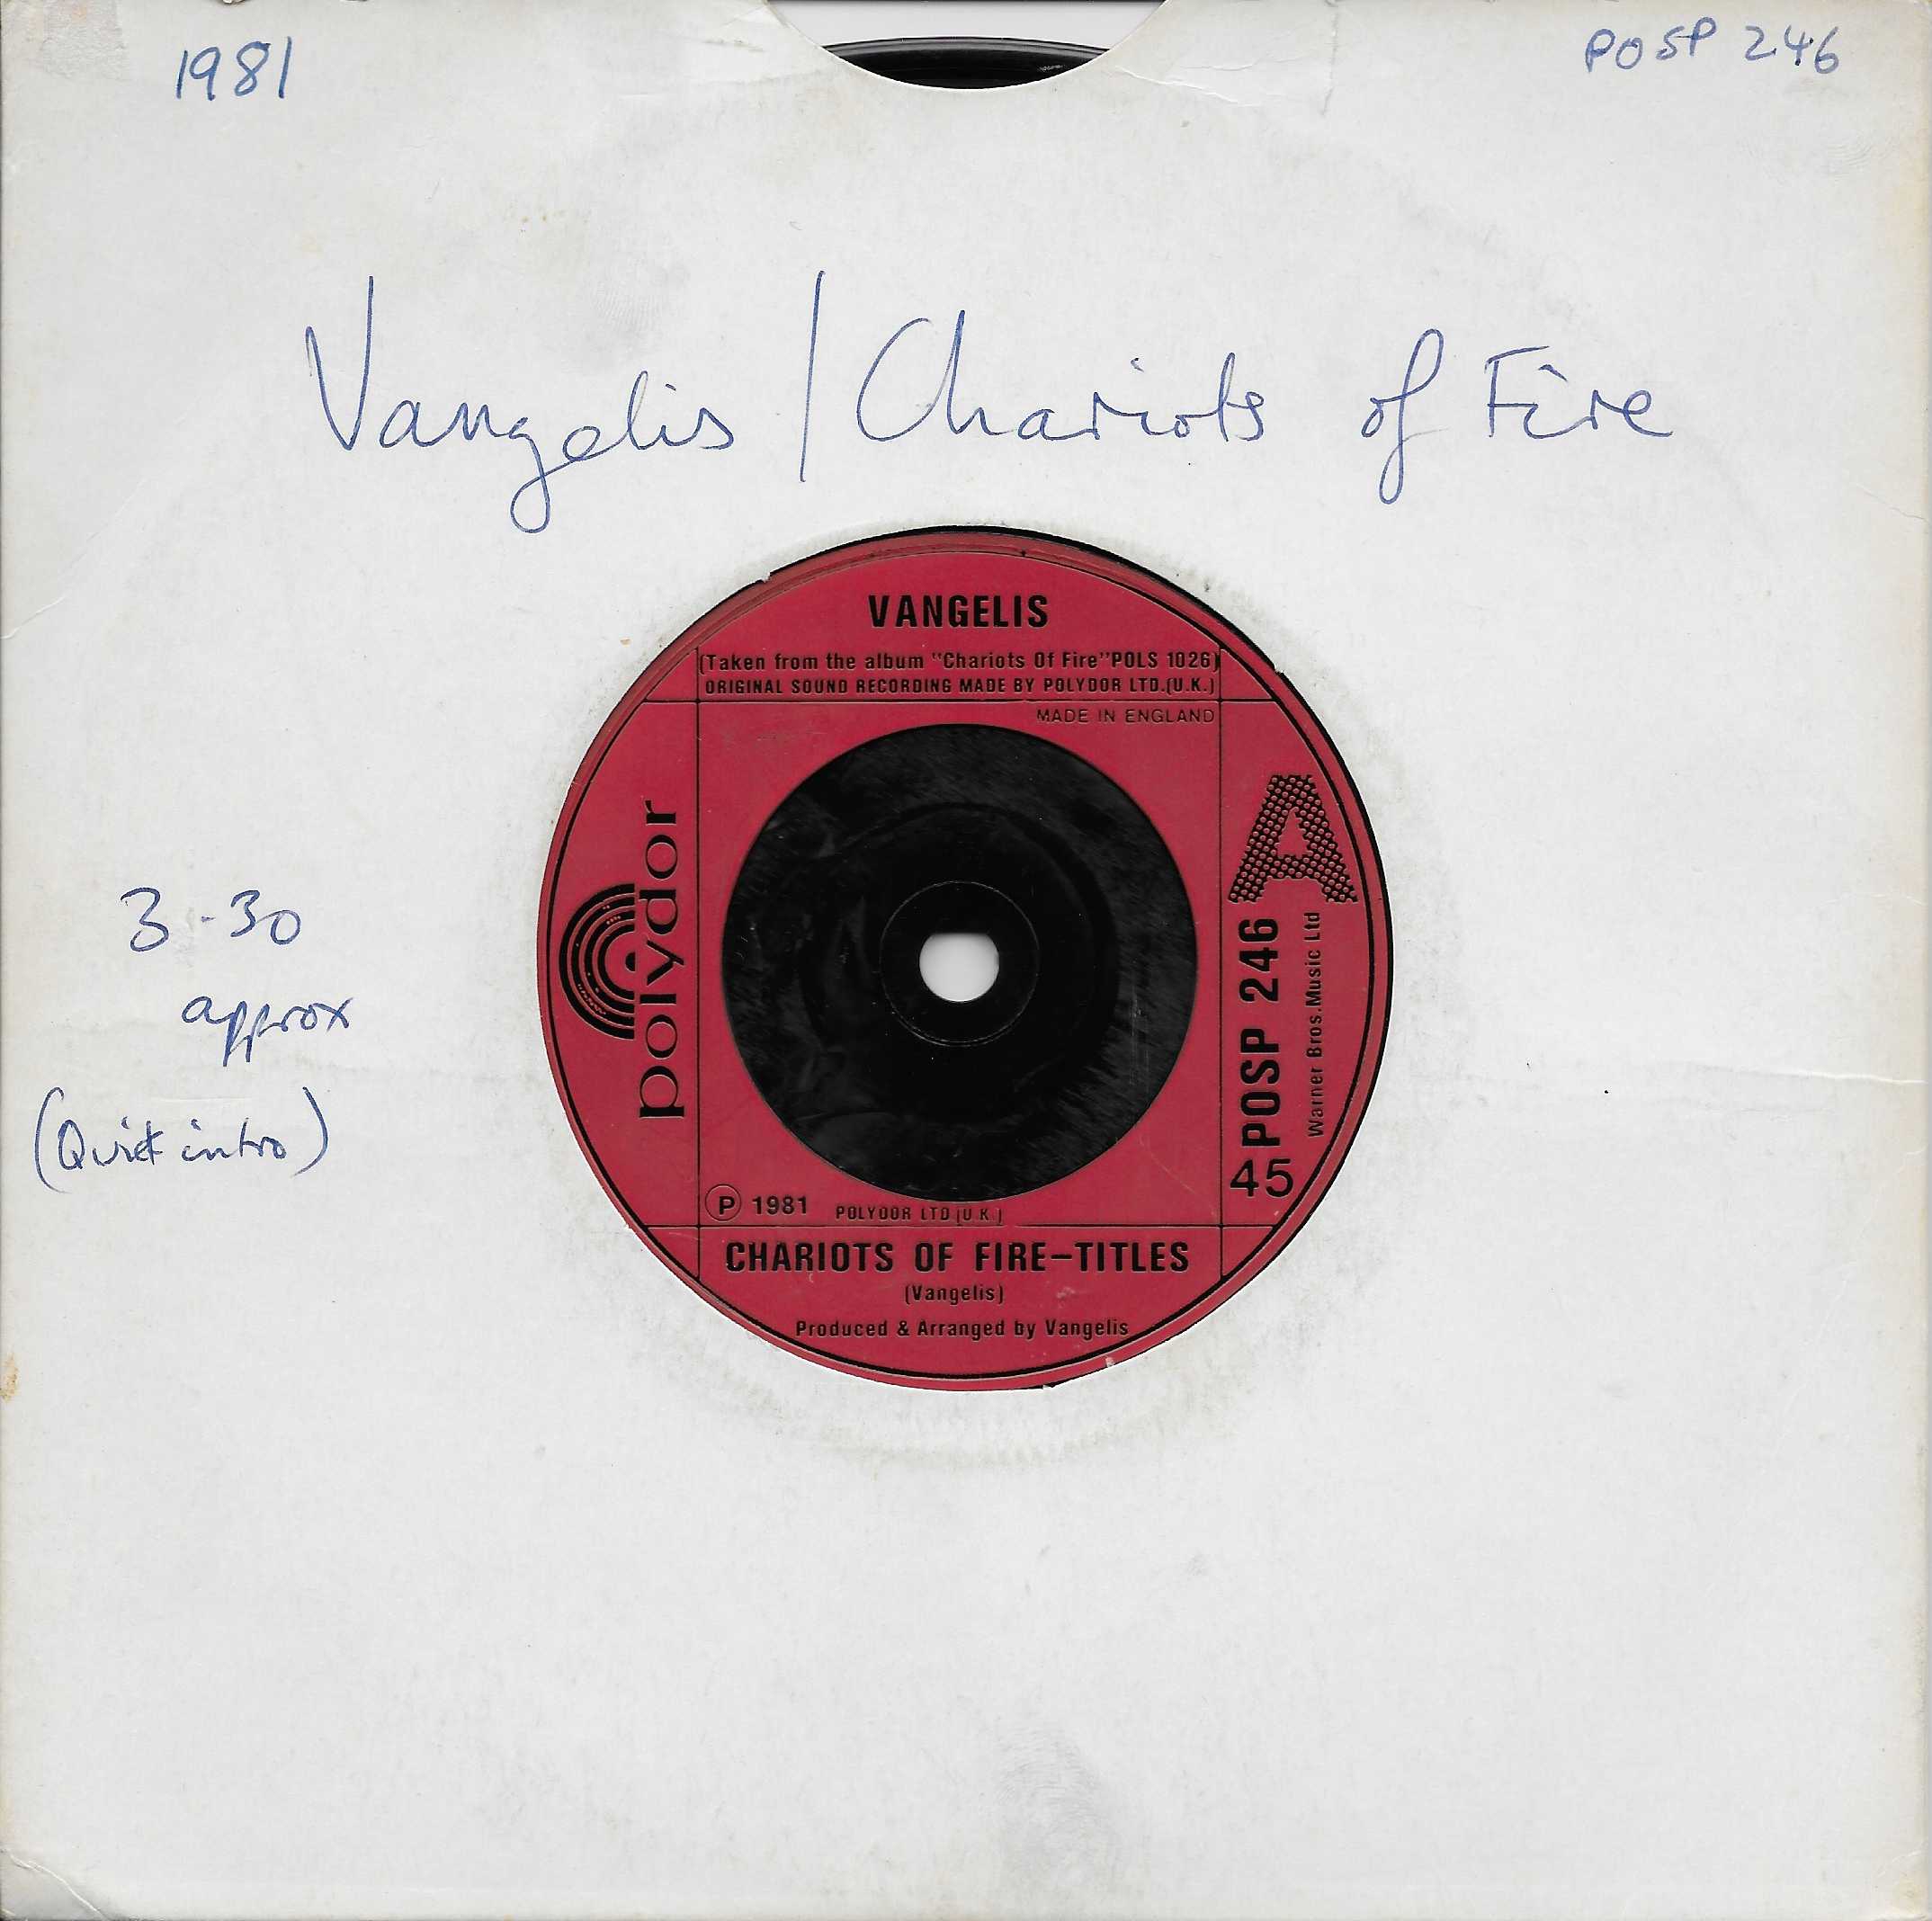 Picture of Chariots of fire (1984 / 8 Olympic grandstand) by artist Vangelis from the BBC singles - Records and Tapes library